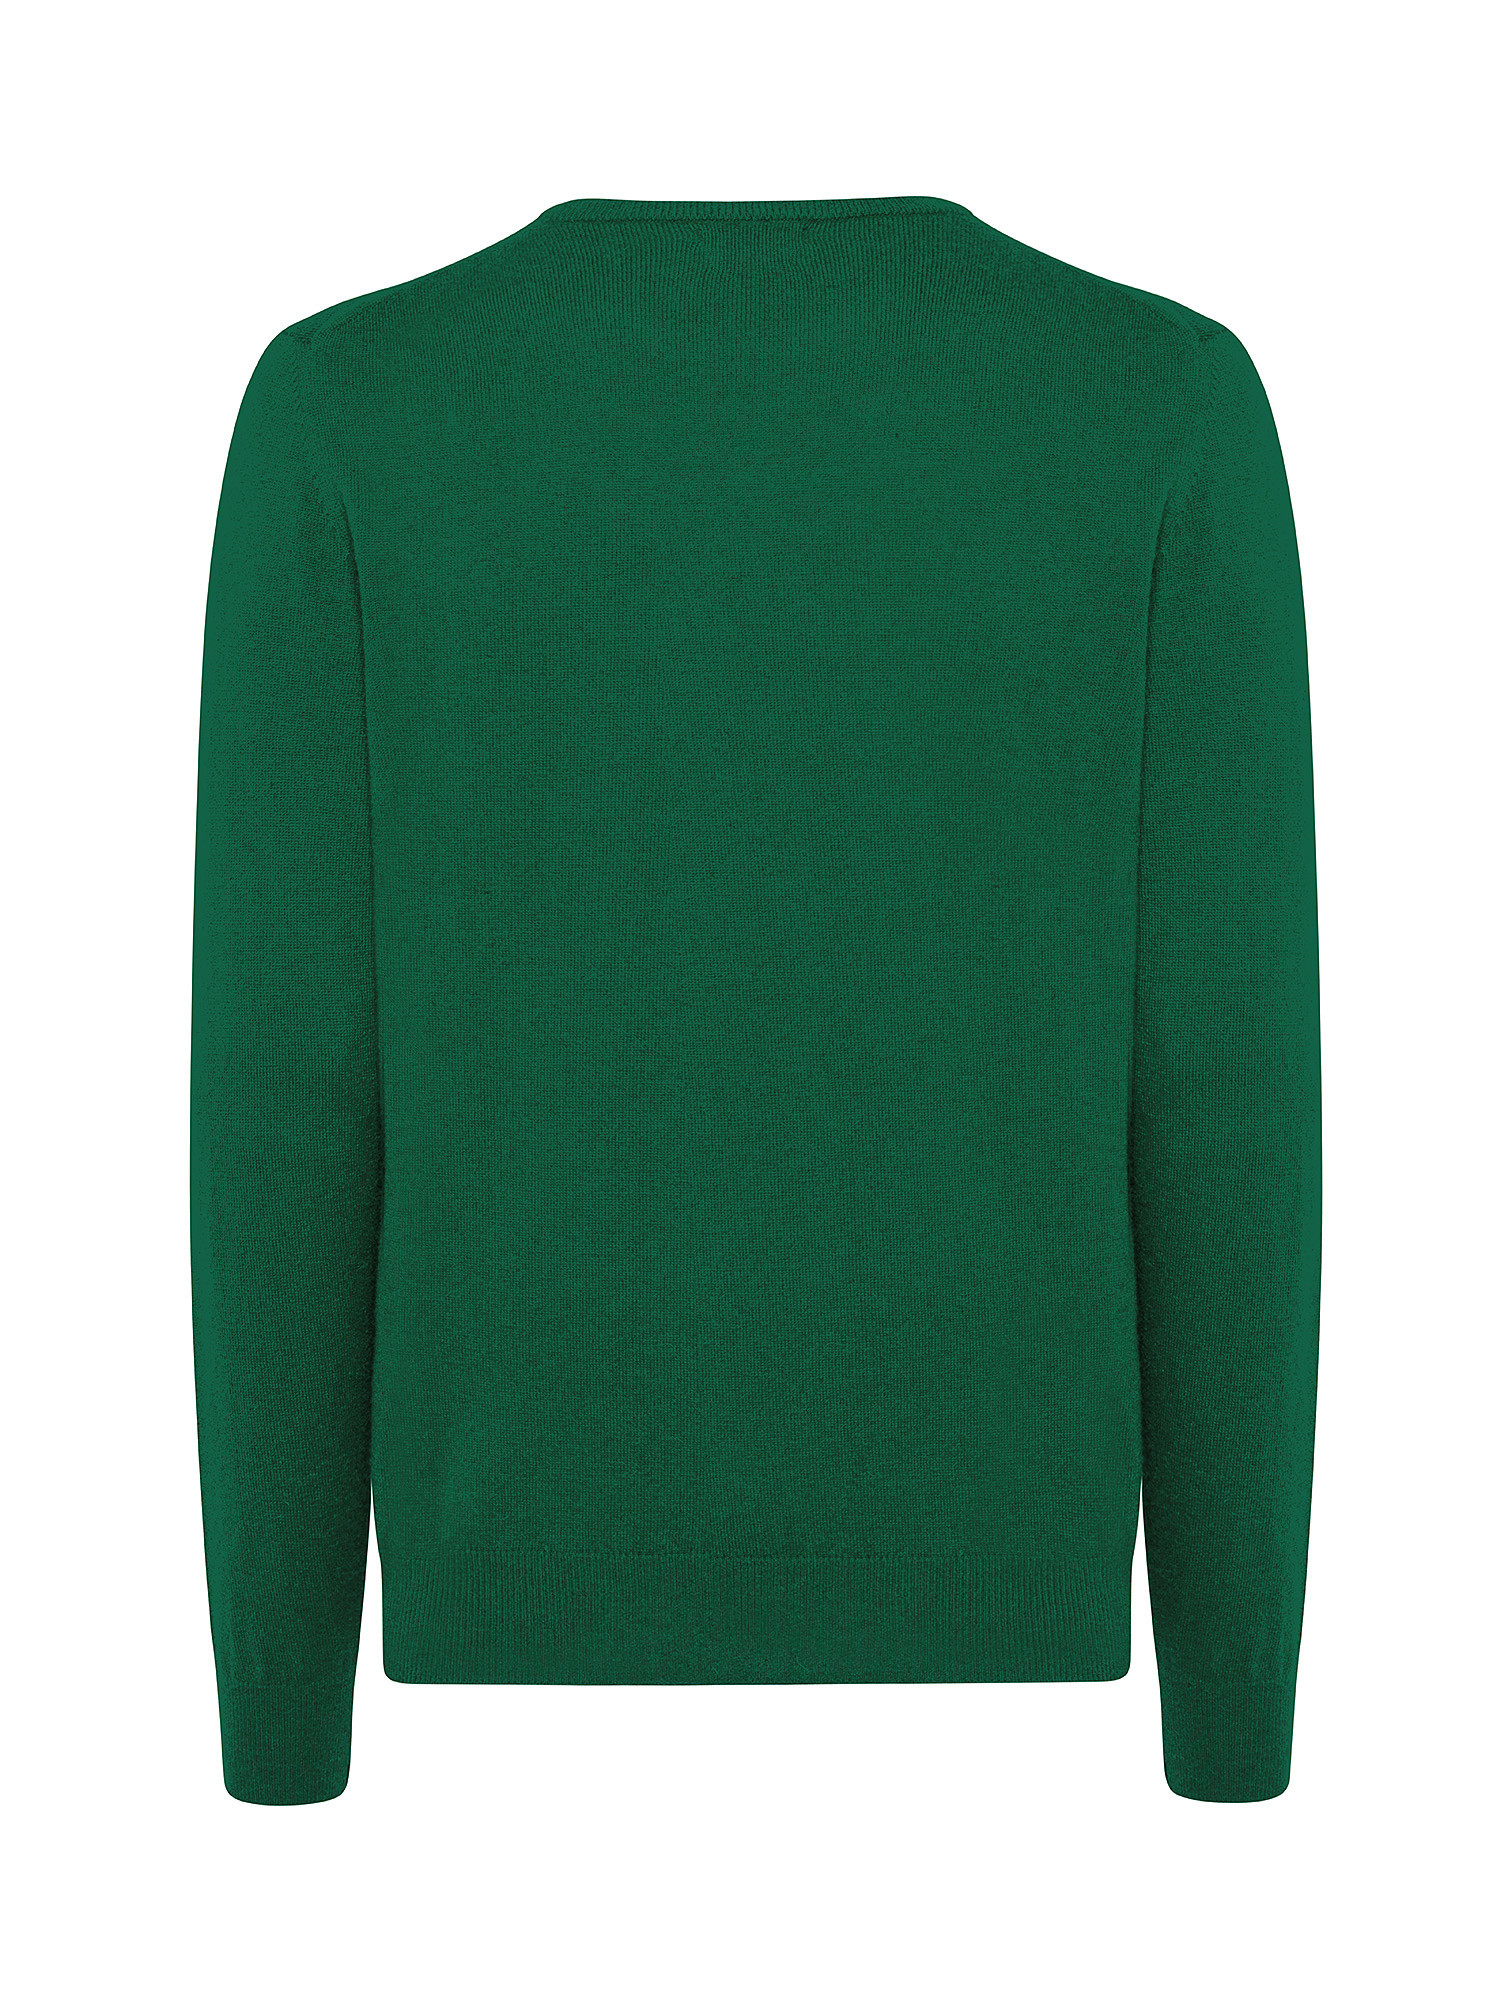 Cashmere Blend crewneck sweater with noble fibers, Green, large image number 1